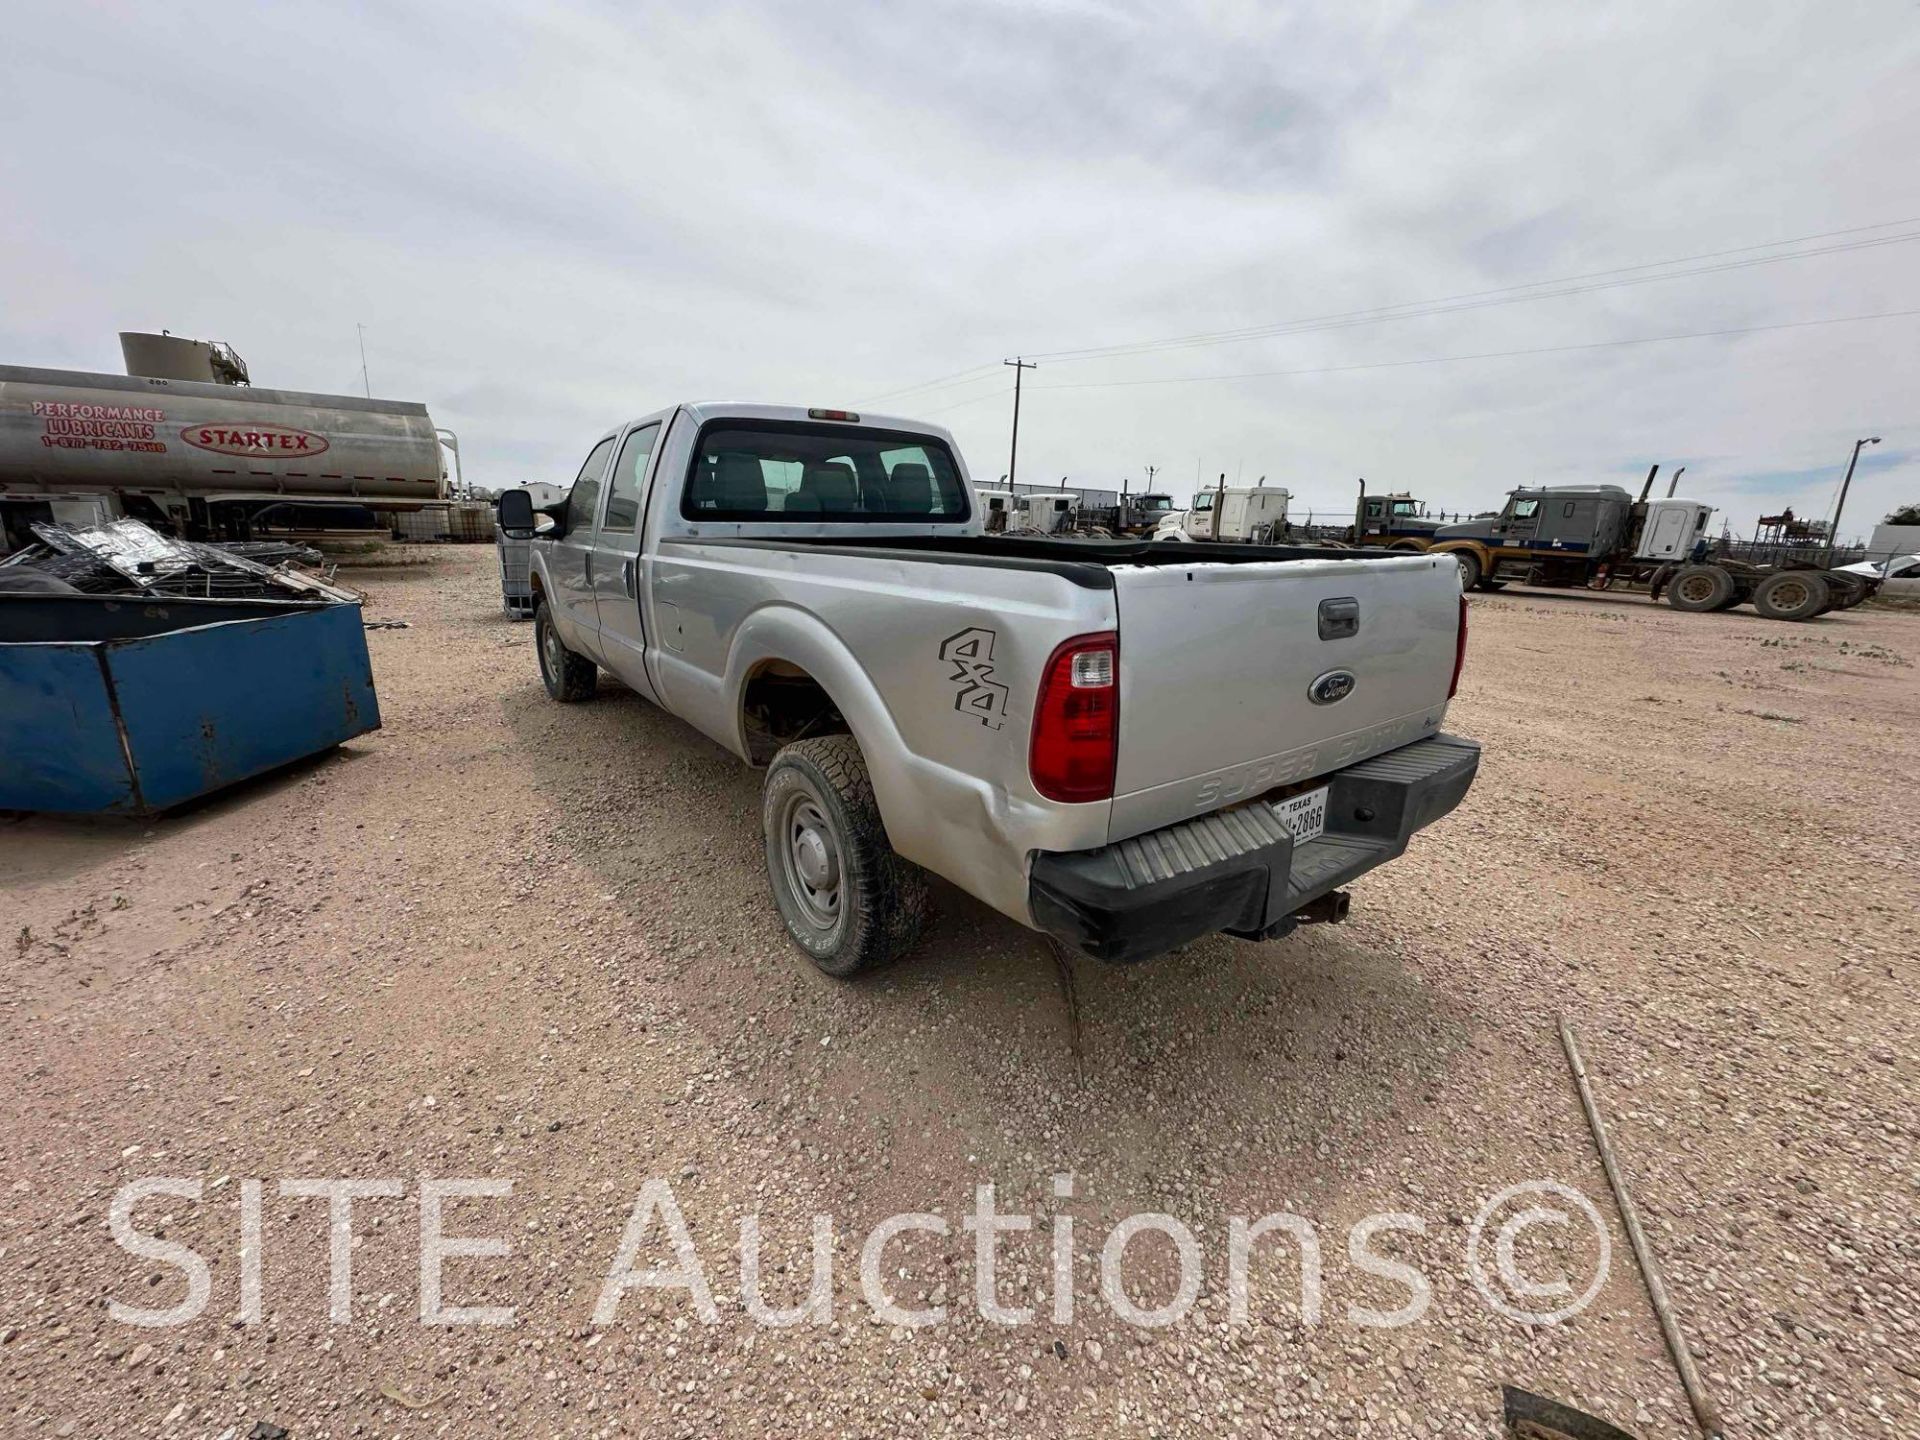 2011 Ford F350 SD Crew Cab Pickup Truck - Image 7 of 19